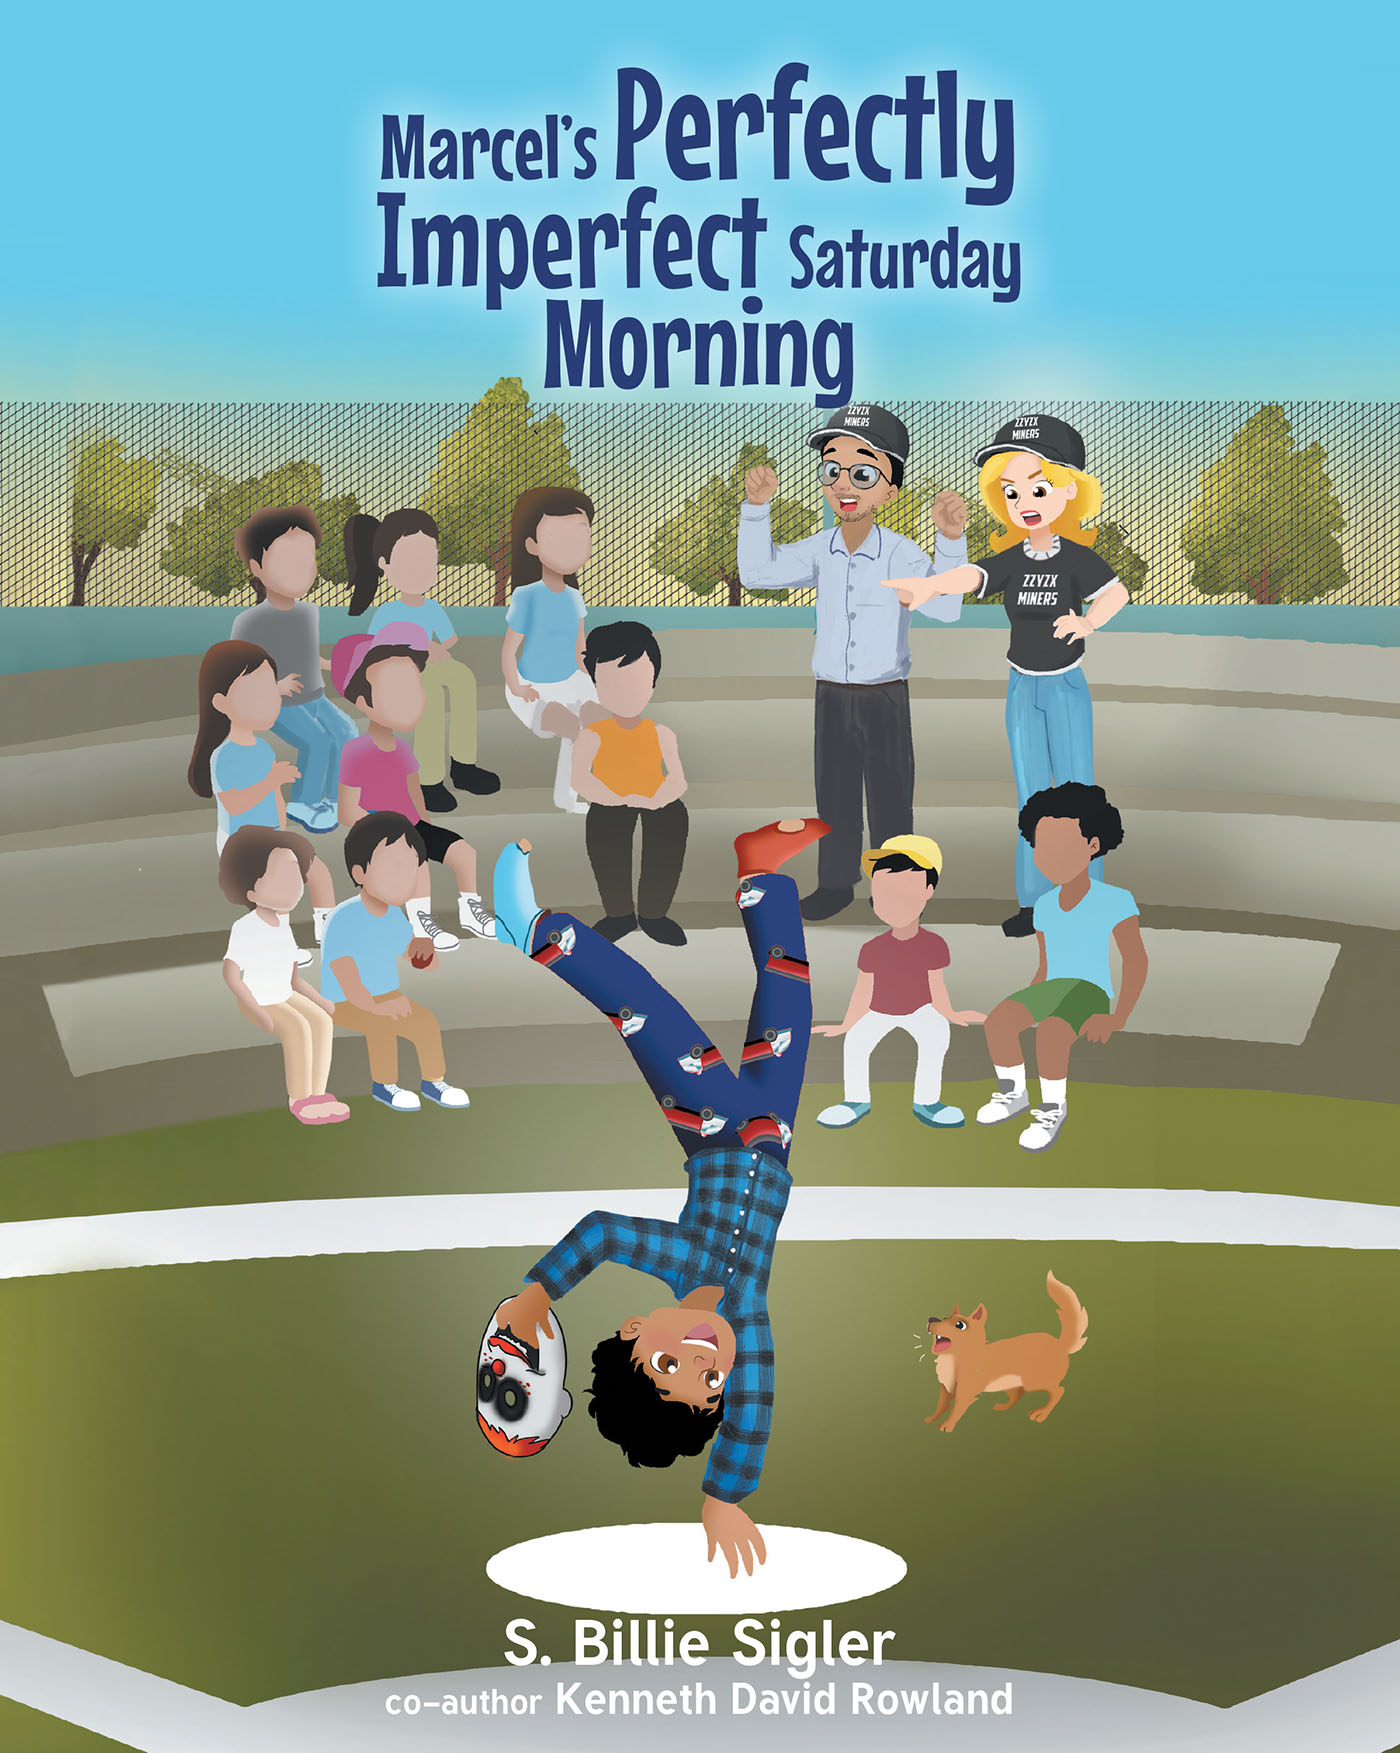 Authors S. Billie Sigler and Kenneth Rowland’s New Book, "Marcel's Perfectly Imperfect Saturday Morning," Tells the Story of a Young Boy's Wildly Imaginative Morning